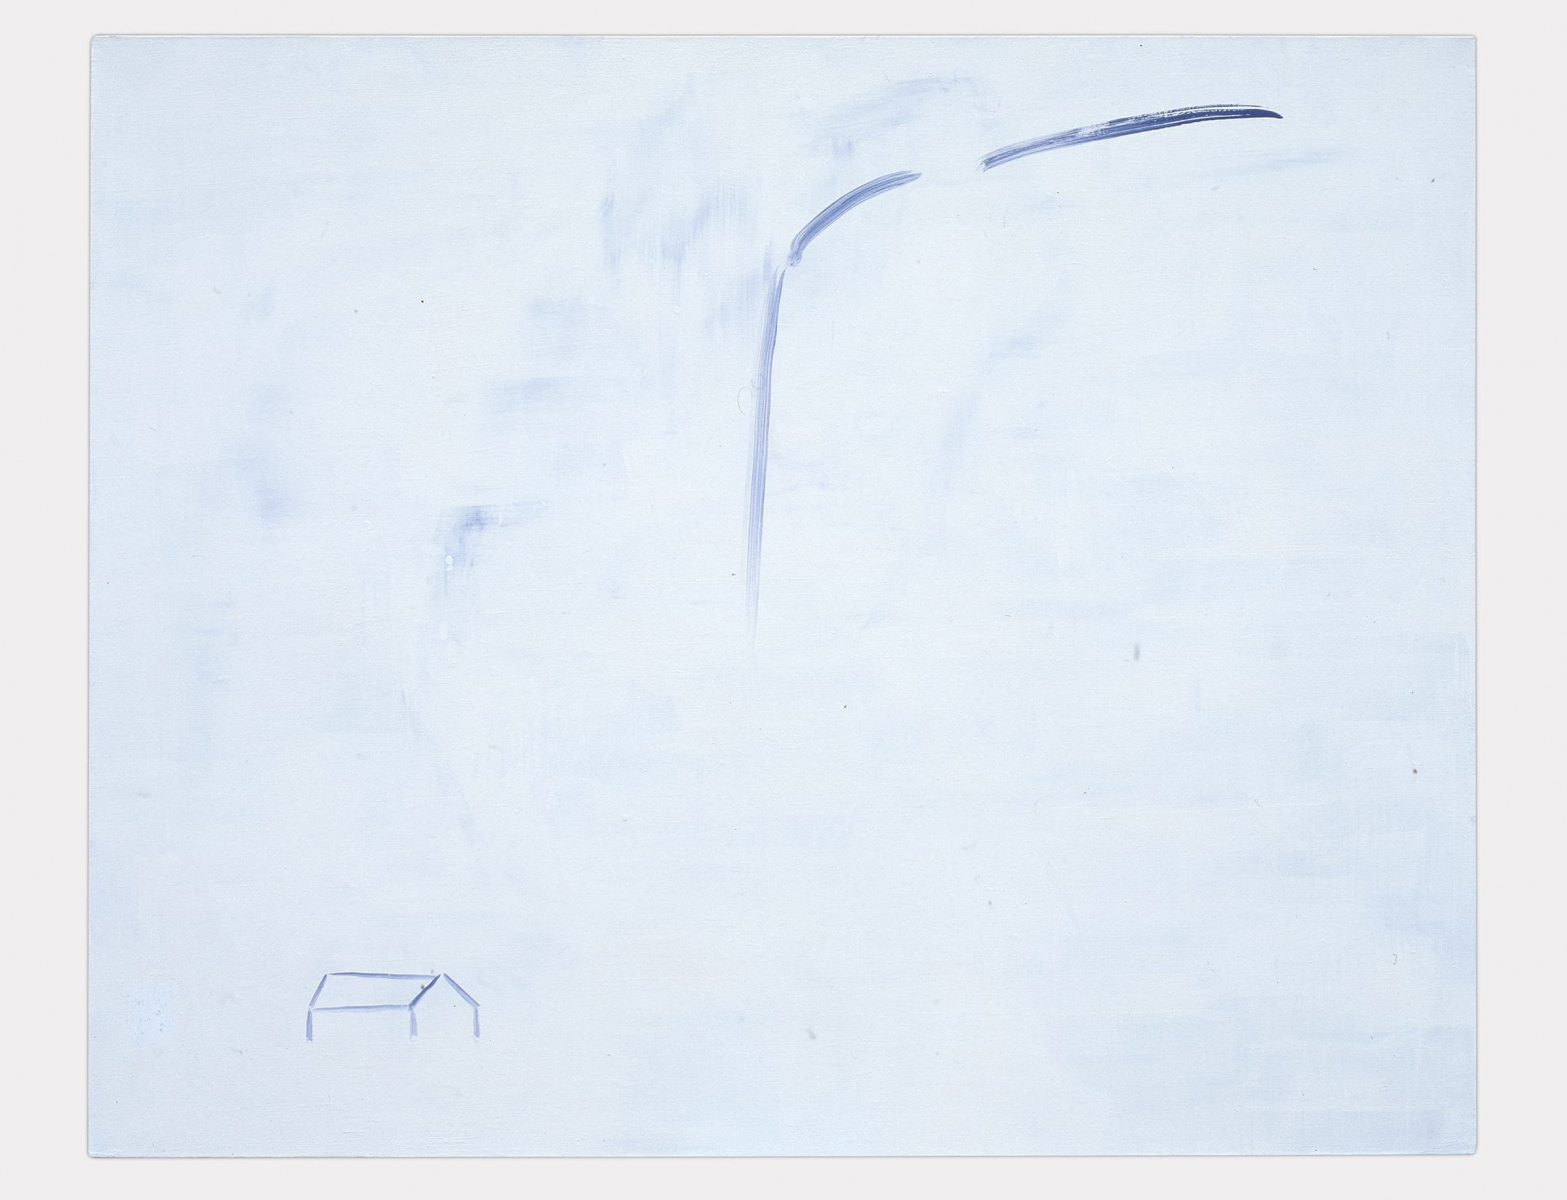 Untitled-96132, 1996, Oil on Canvas, 181.8x227.3cm